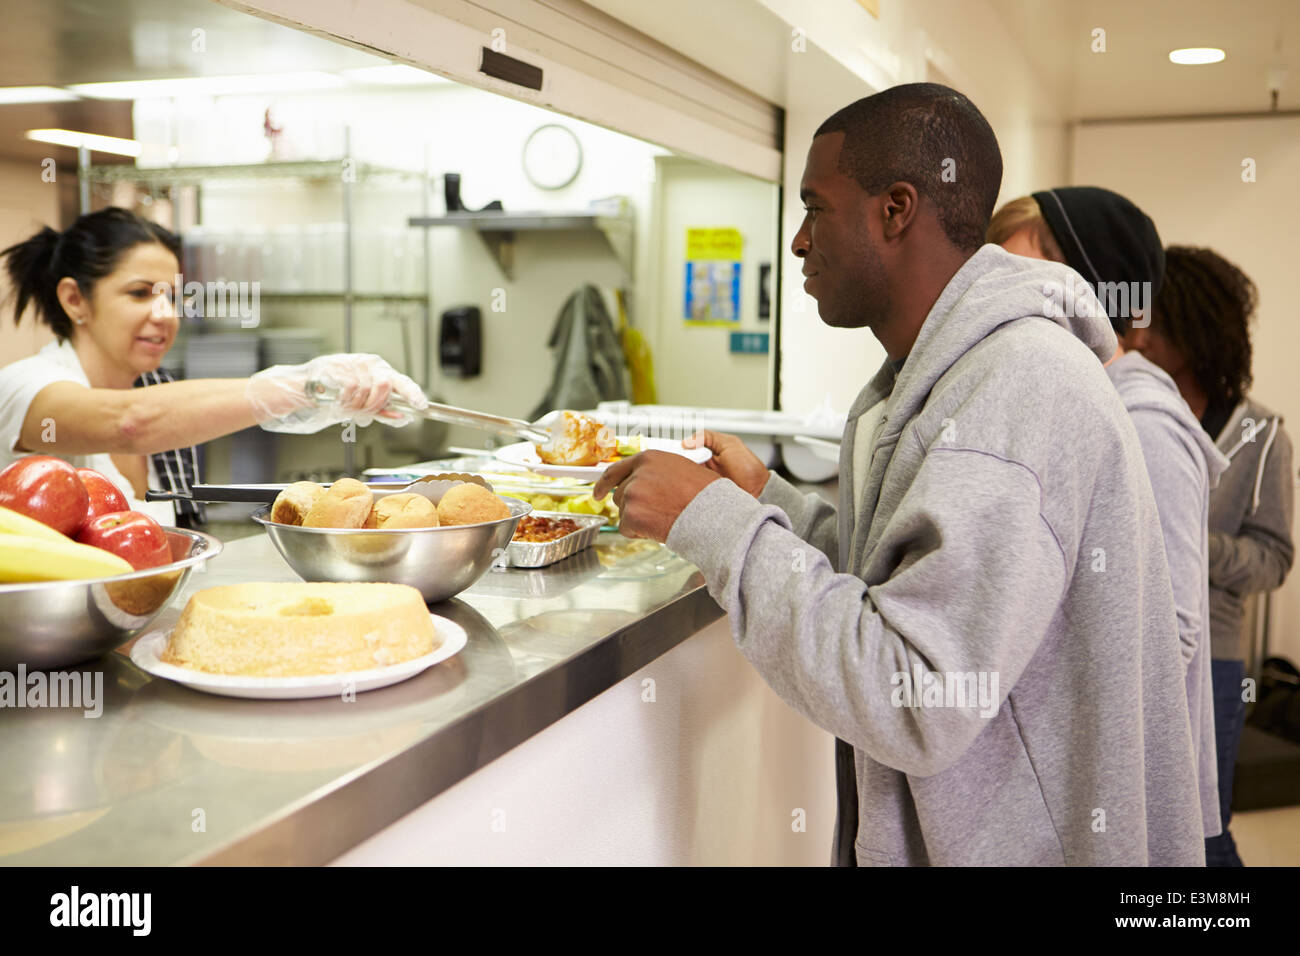 Kitchen Serving Food In Homeless Shelter Stock Photo